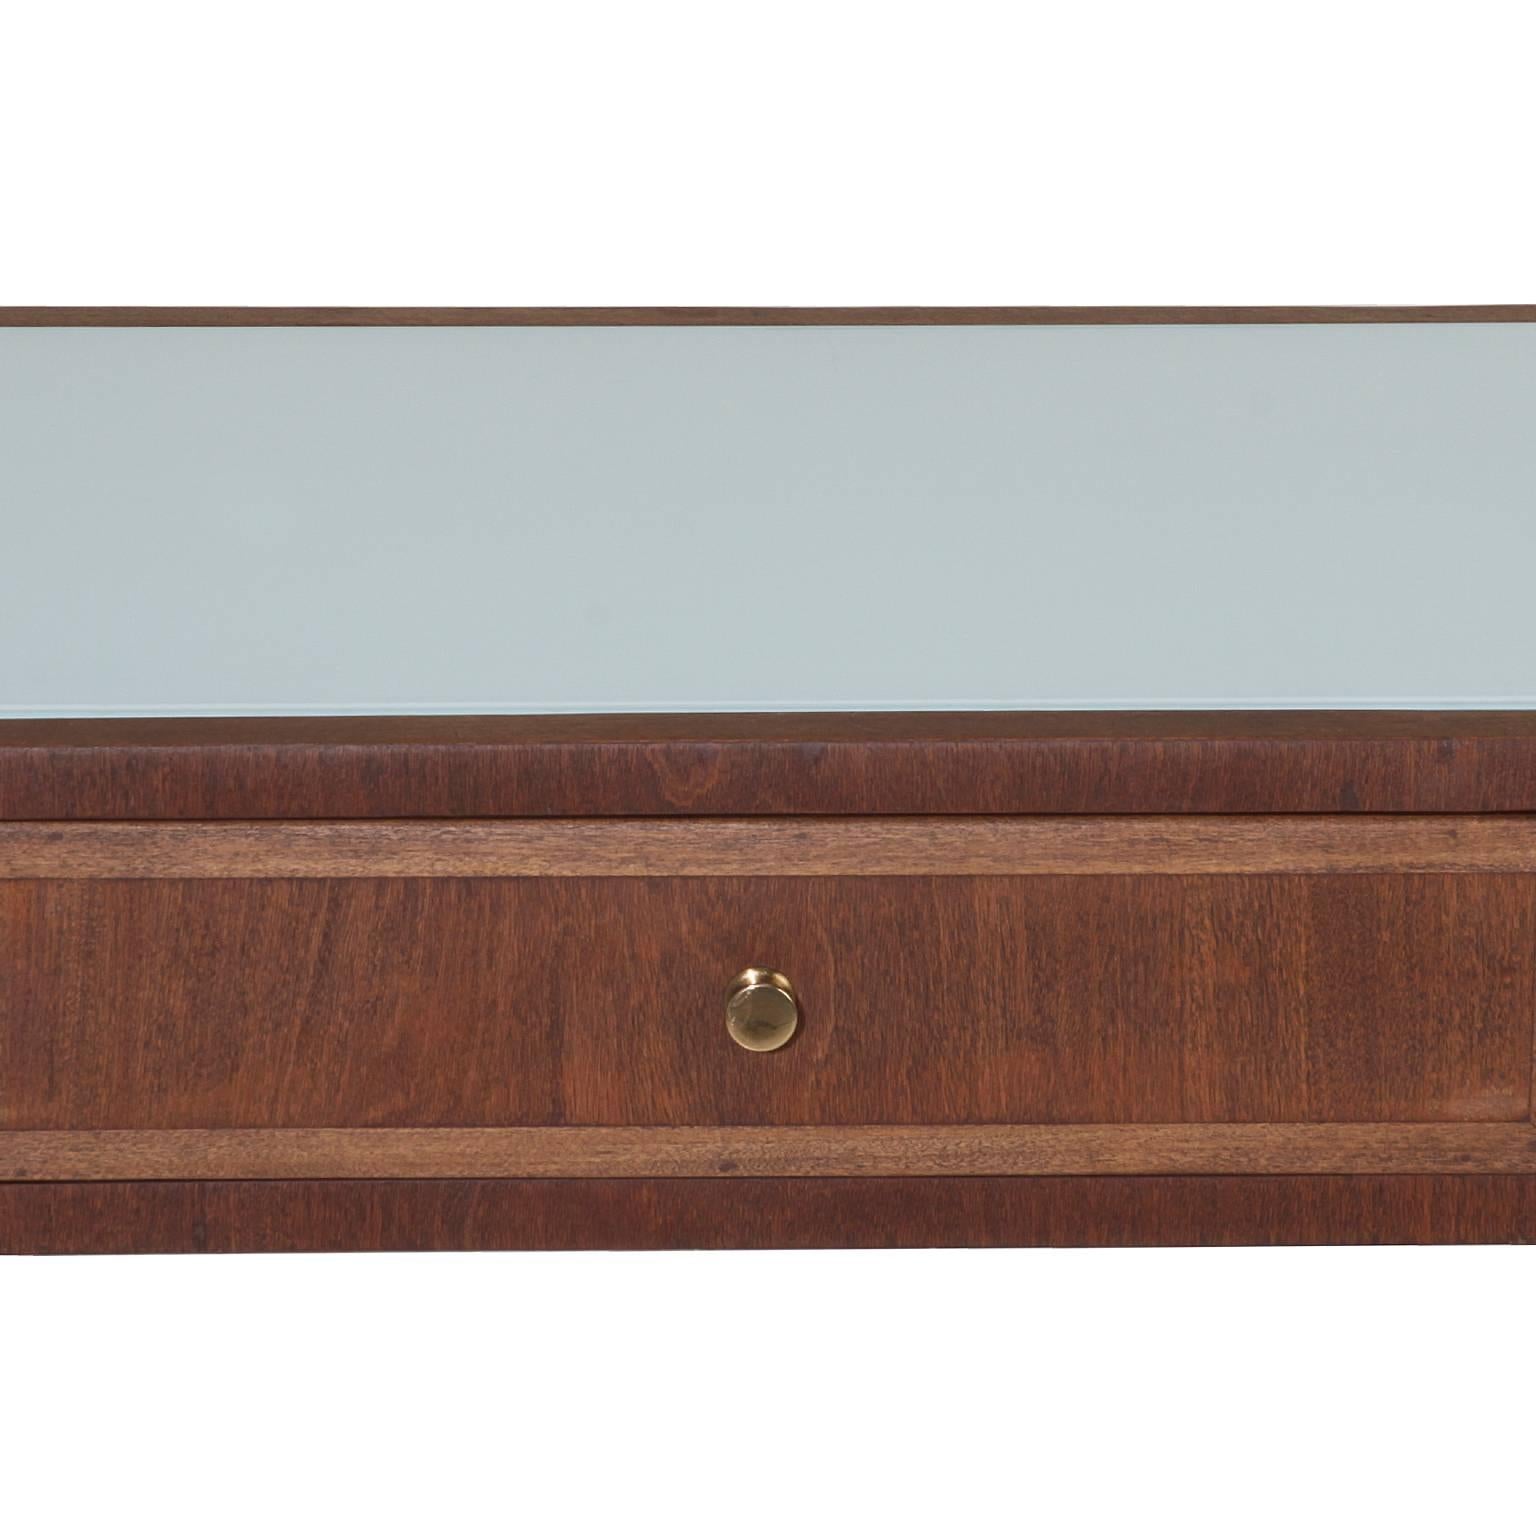 Giuseppe Scapinelli Three-Drawer Brazilian Hardwood Desk with White Glass Top For Sale 2